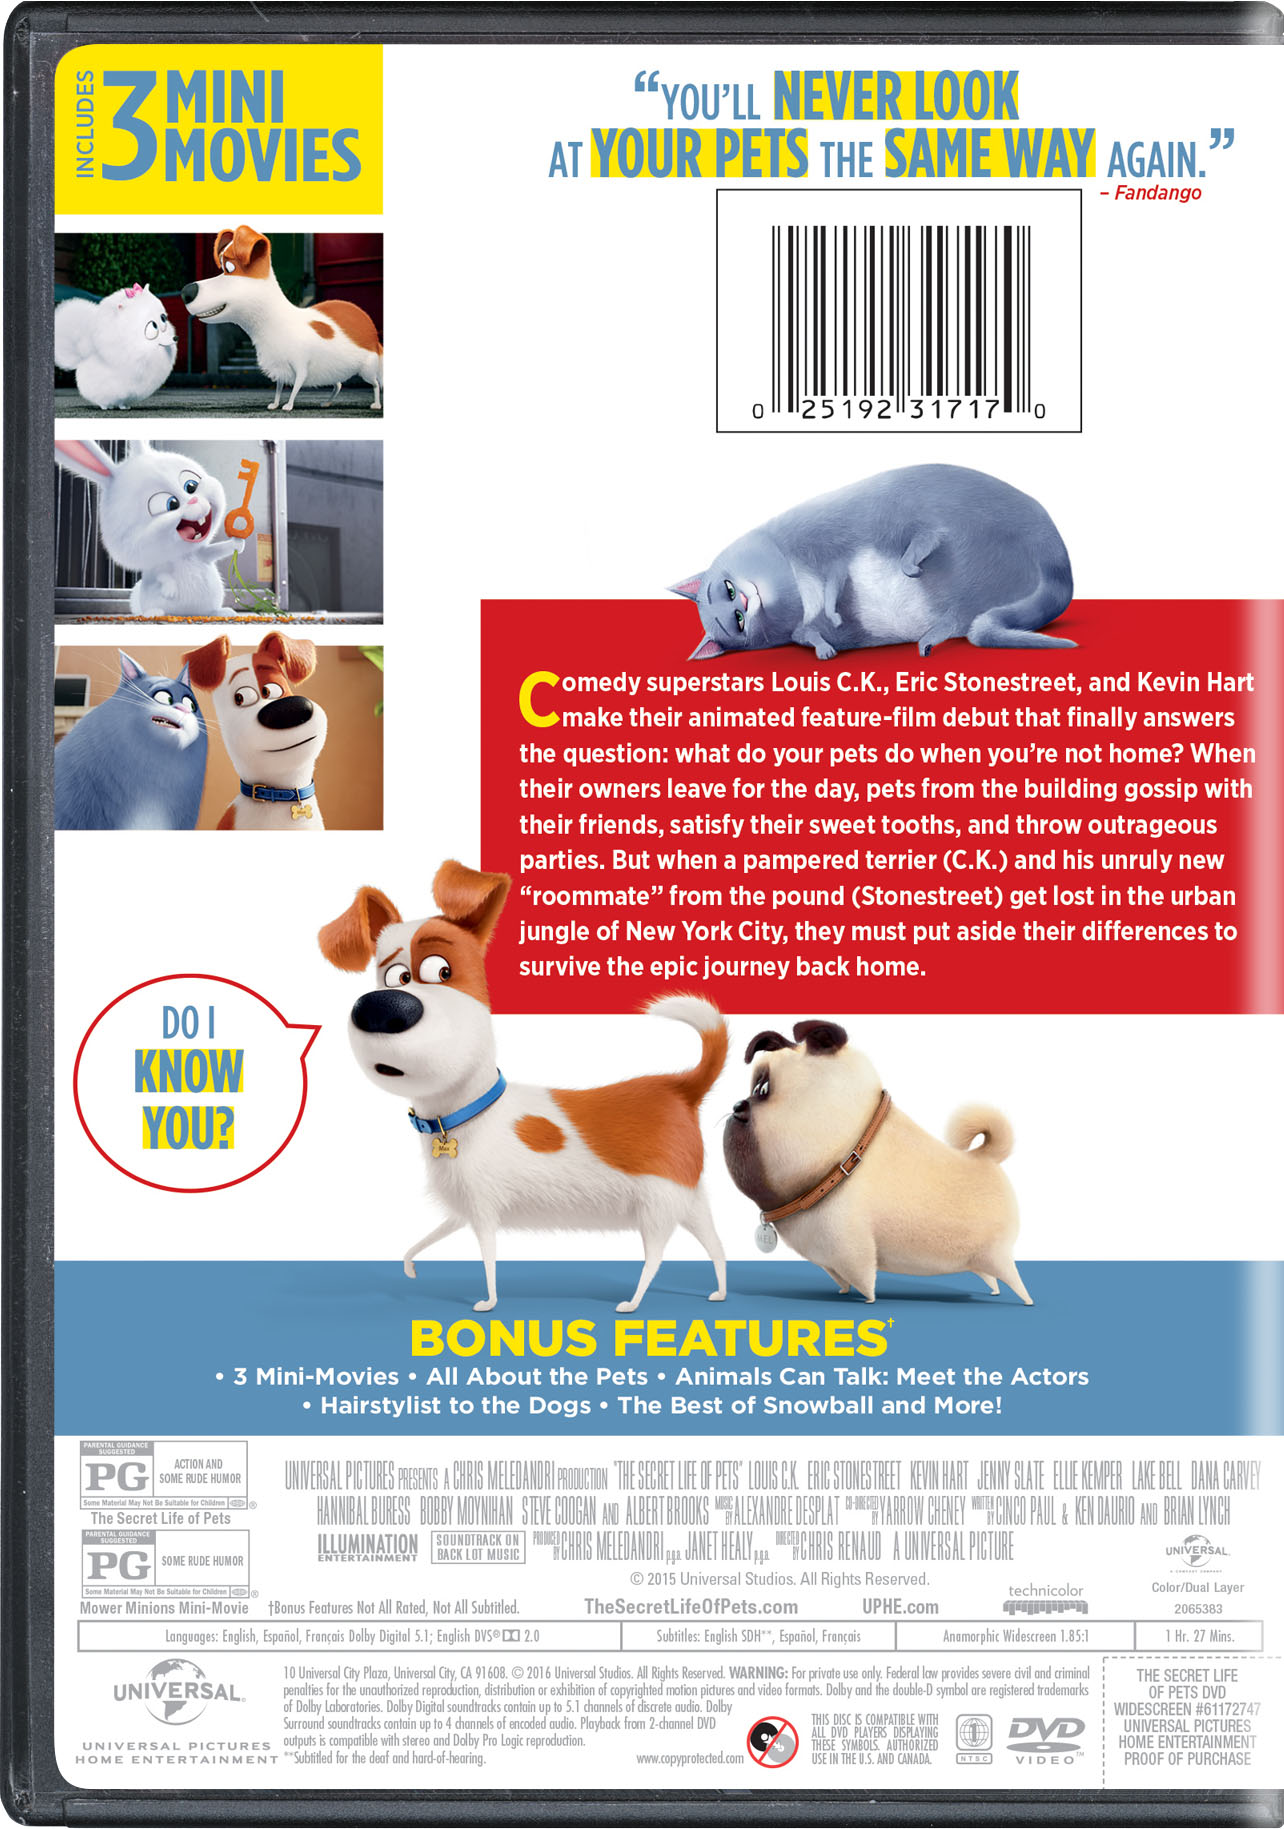 The Secret Life of Pets (Other) - image 2 of 5